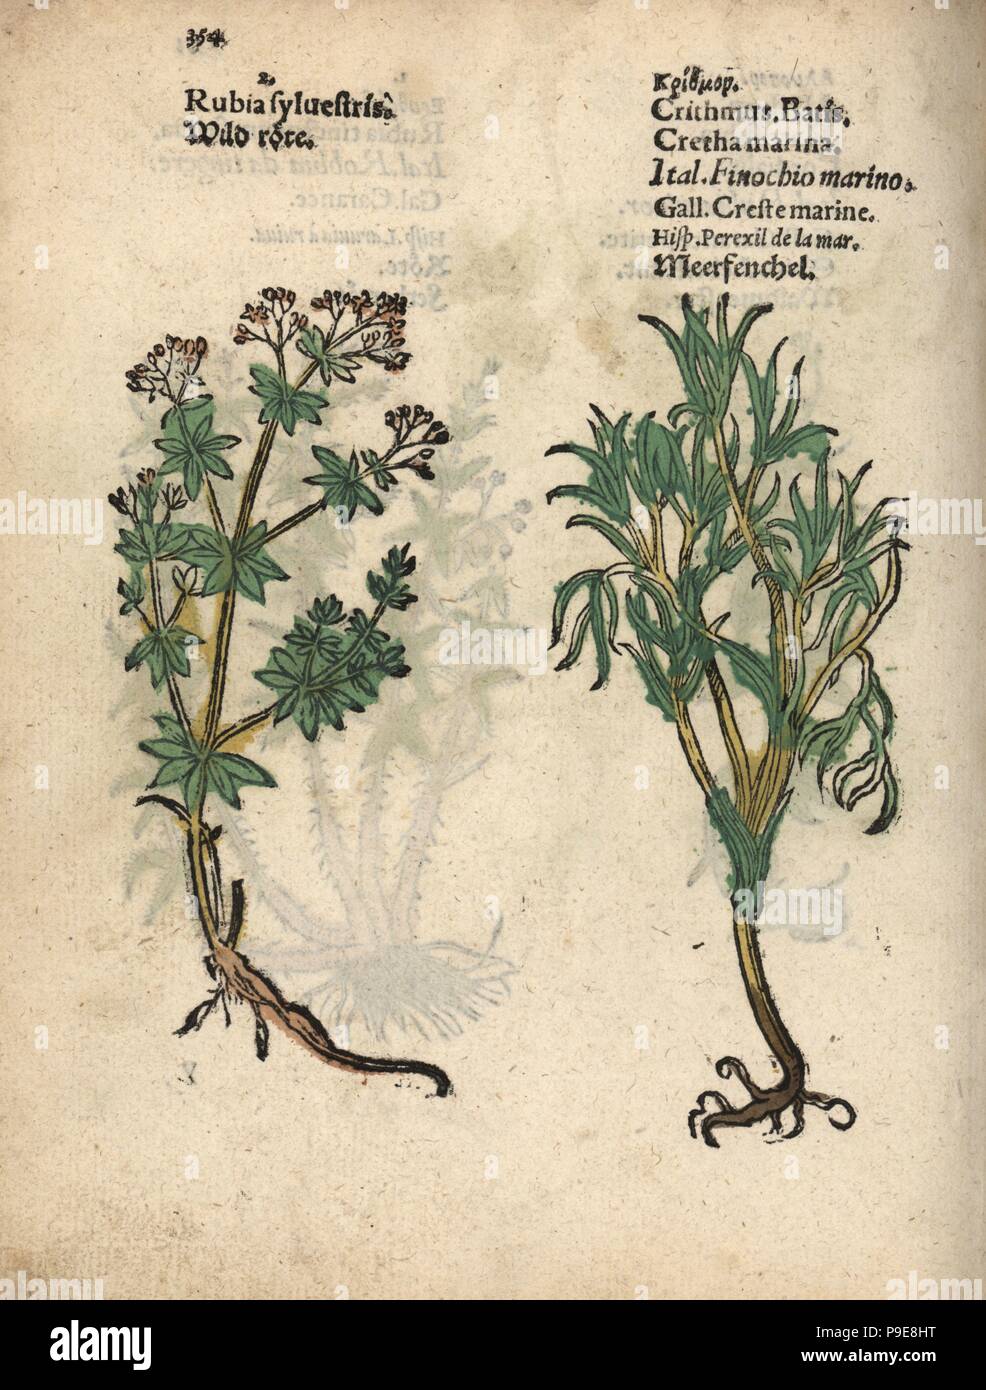 Hedge bedstraw, Galium mollugo, and rock samphire, Crithmum maritimum. Handcoloured woodblock engraving of a botanical illustration from Adam Lonicer's Krauterbuch, or Herbal, Frankfurt, 1557. This from a 17th century pirate edition or atlas of illustrations only, with captions in Latin, Greek, French, Italian, German, and in English manuscript. Stock Photo